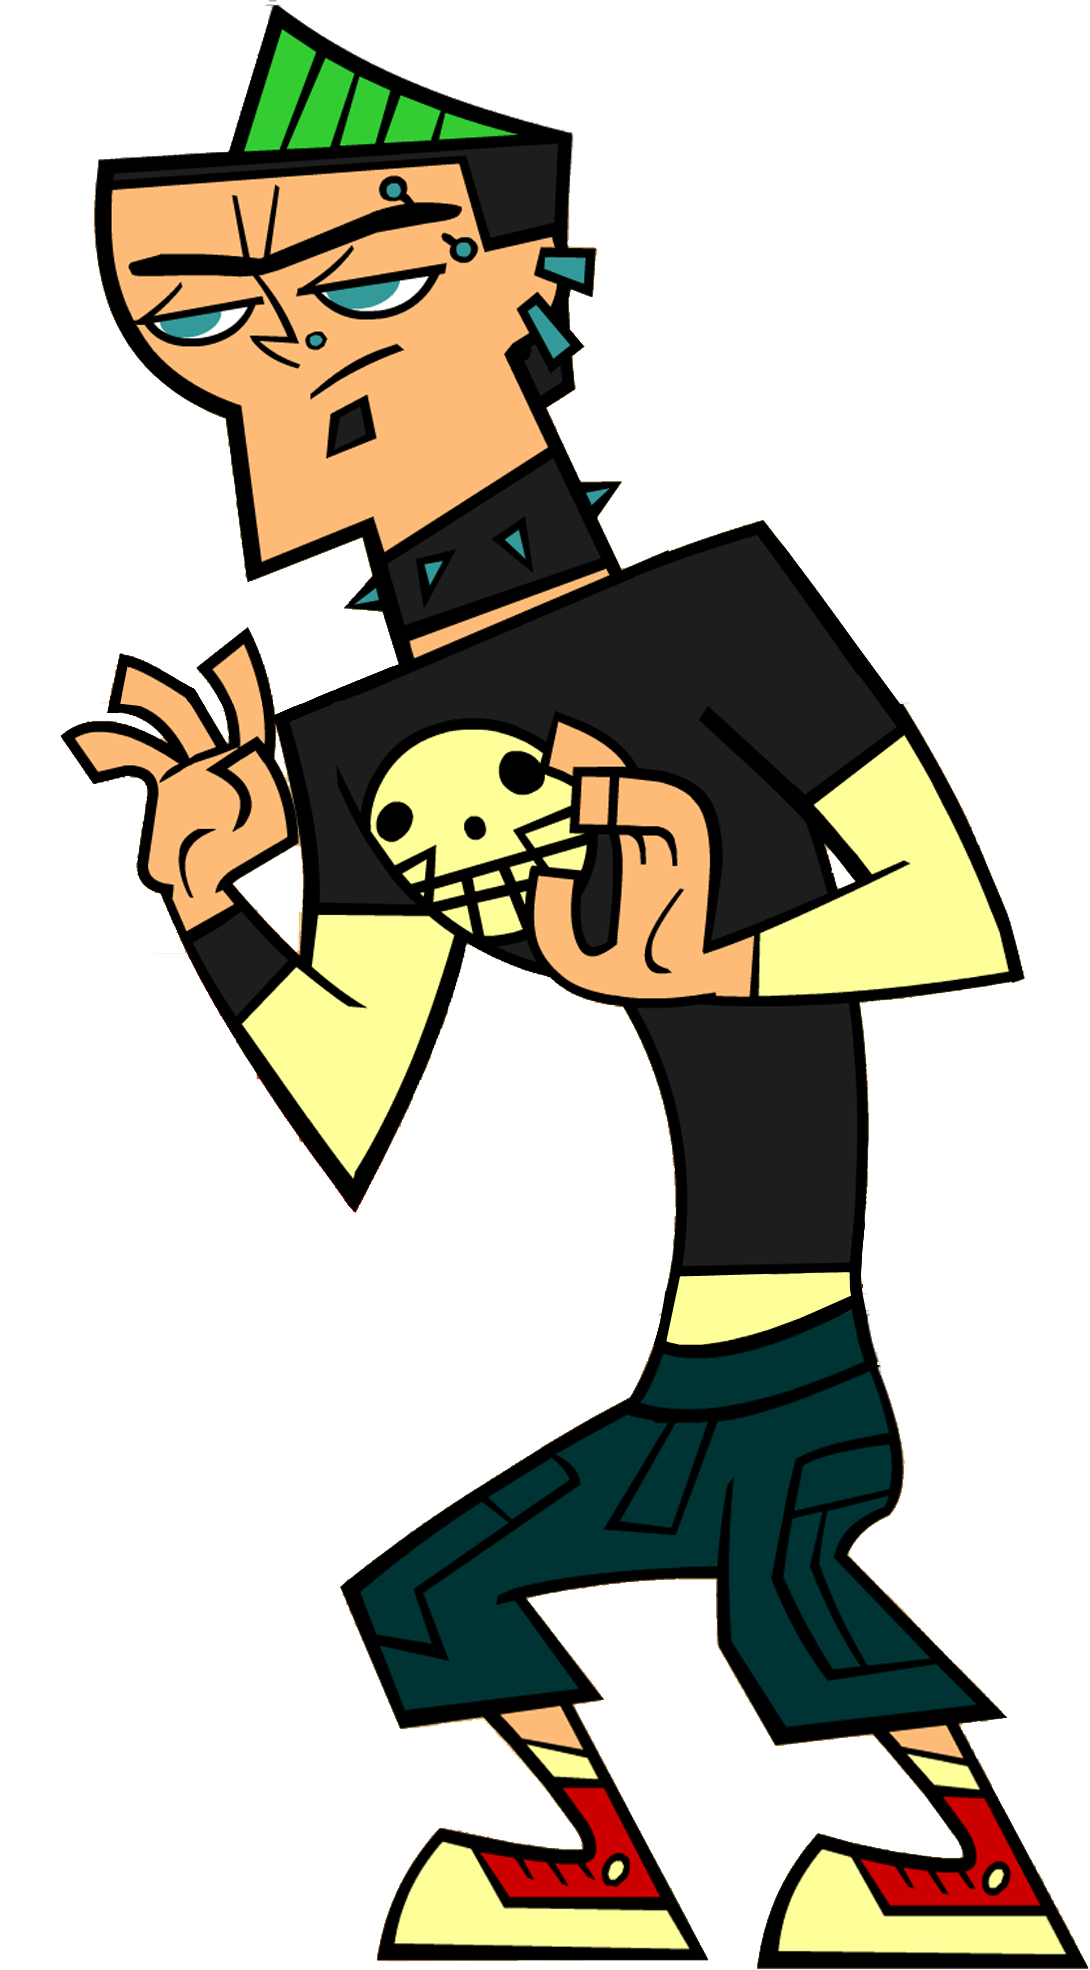 Great How To Draw Duncan From Total Drama Island Don t miss out ...